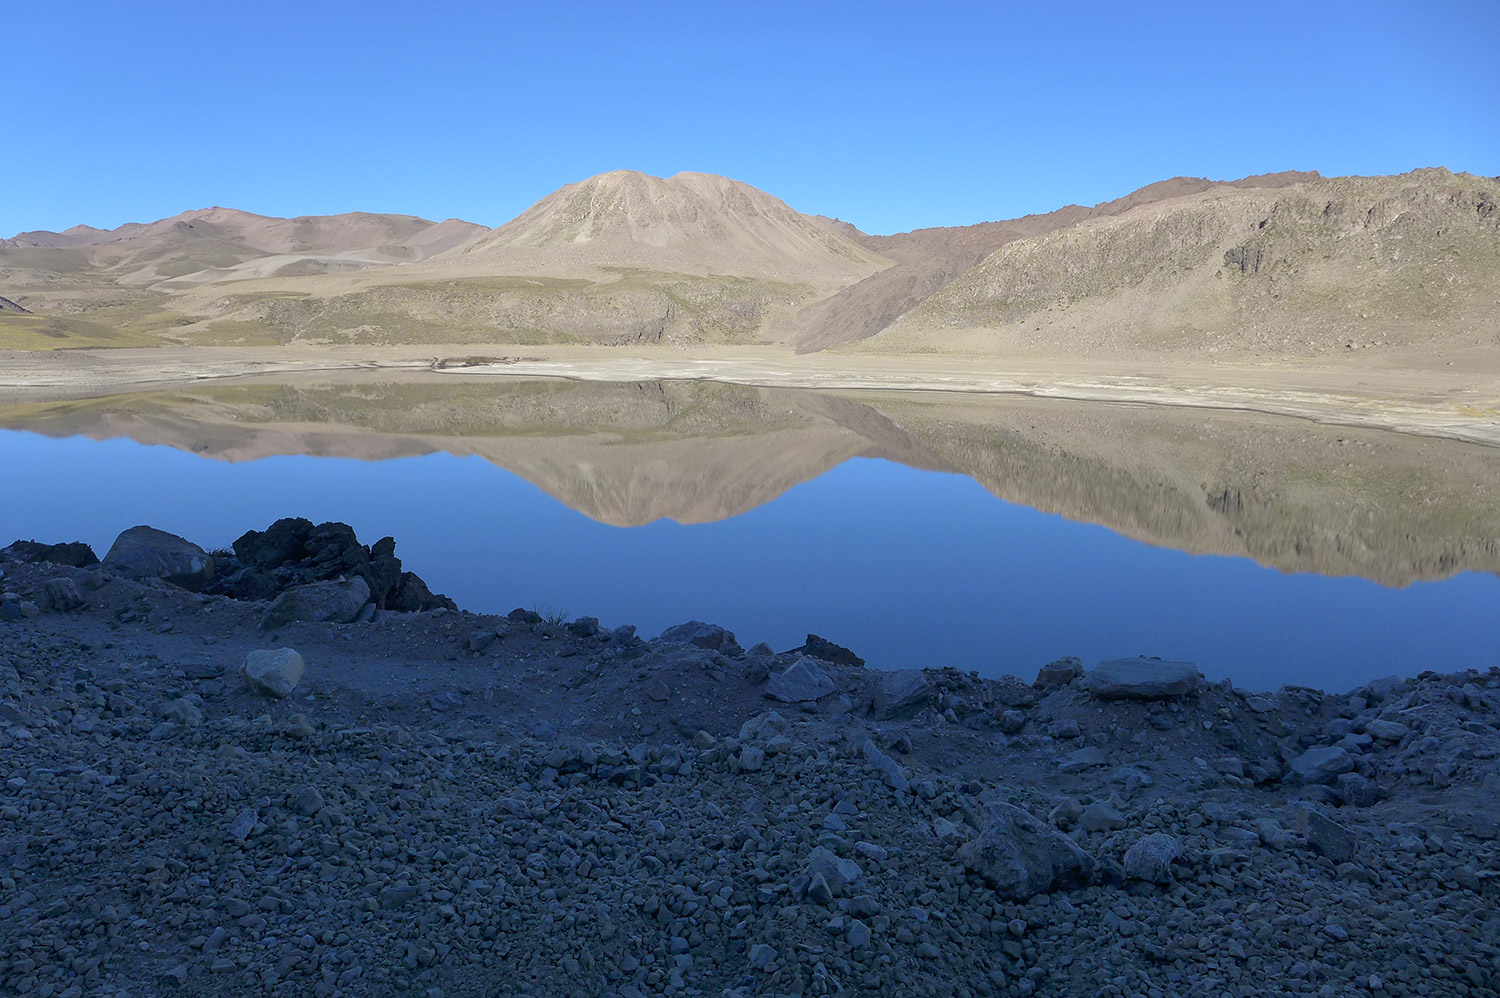 Stony, brown-gray dome reflected perfectly in cobalt blue lake, against clear blue sky.